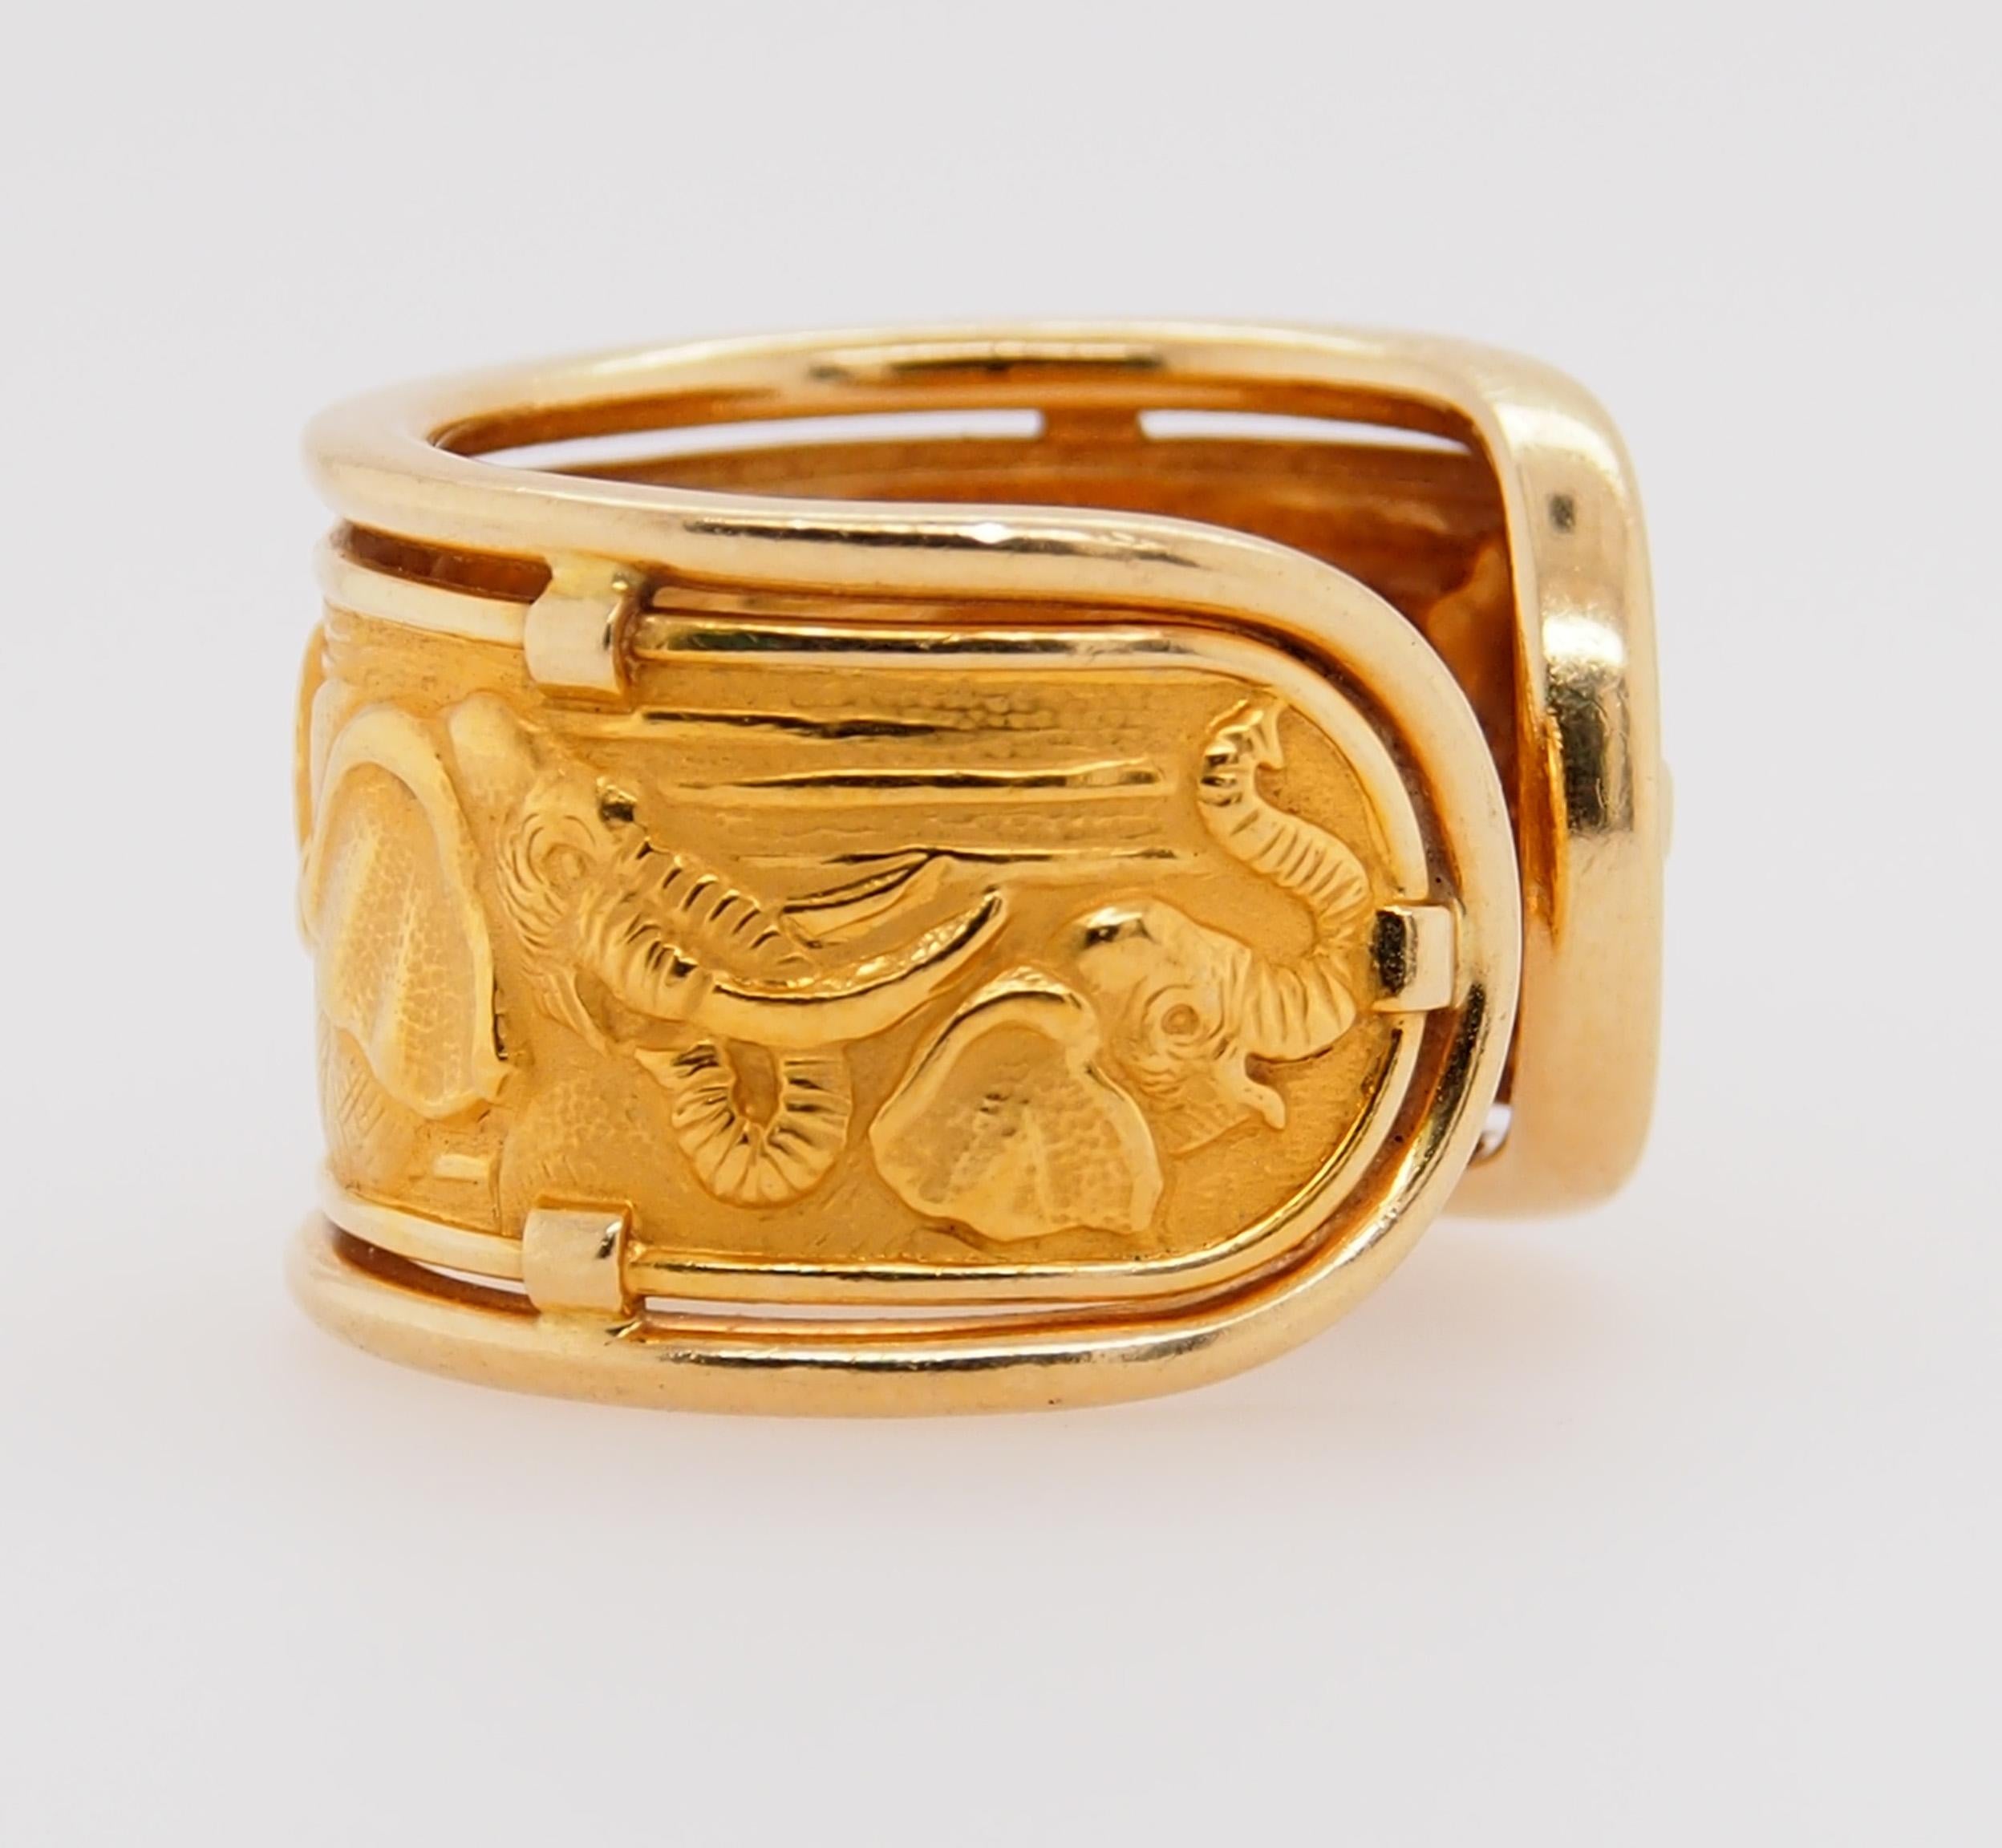 Carrera y Carrera 18K Yellow Gold engraved Elephant Band.  Approximately 1/2 inch wide, open back, finger size 7.  Weighs 6.84 grams.